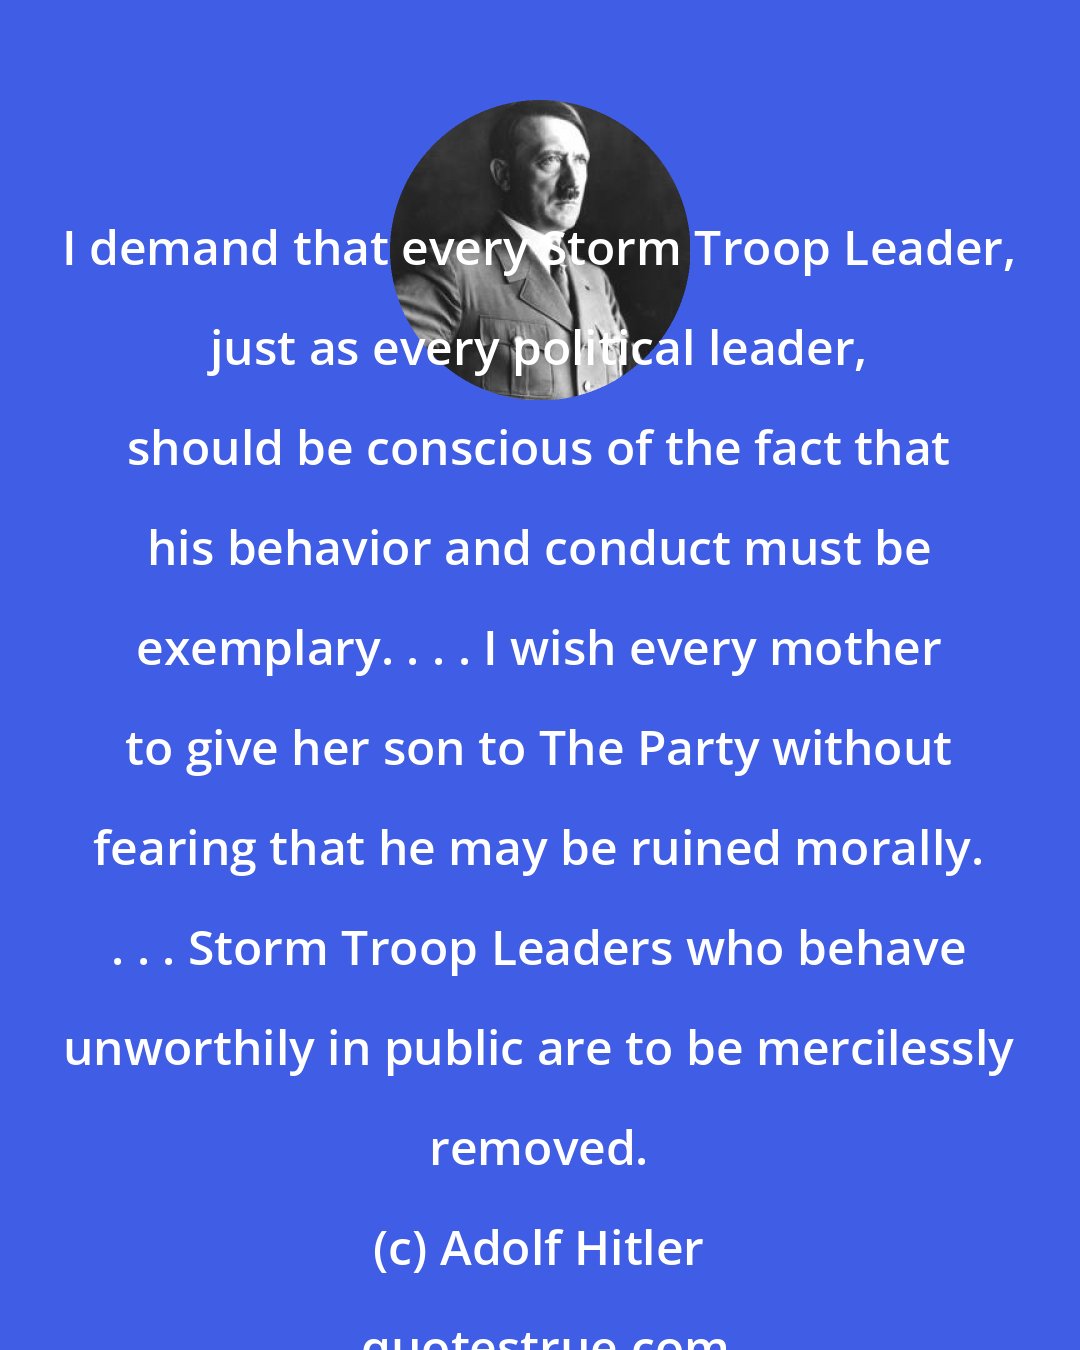 Adolf Hitler: I demand that every Storm Troop Leader, just as every political leader, should be conscious of the fact that his behavior and conduct must be exemplary. . . . I wish every mother to give her son to The Party without fearing that he may be ruined morally. . . . Storm Troop Leaders who behave unworthily in public are to be mercilessly removed.